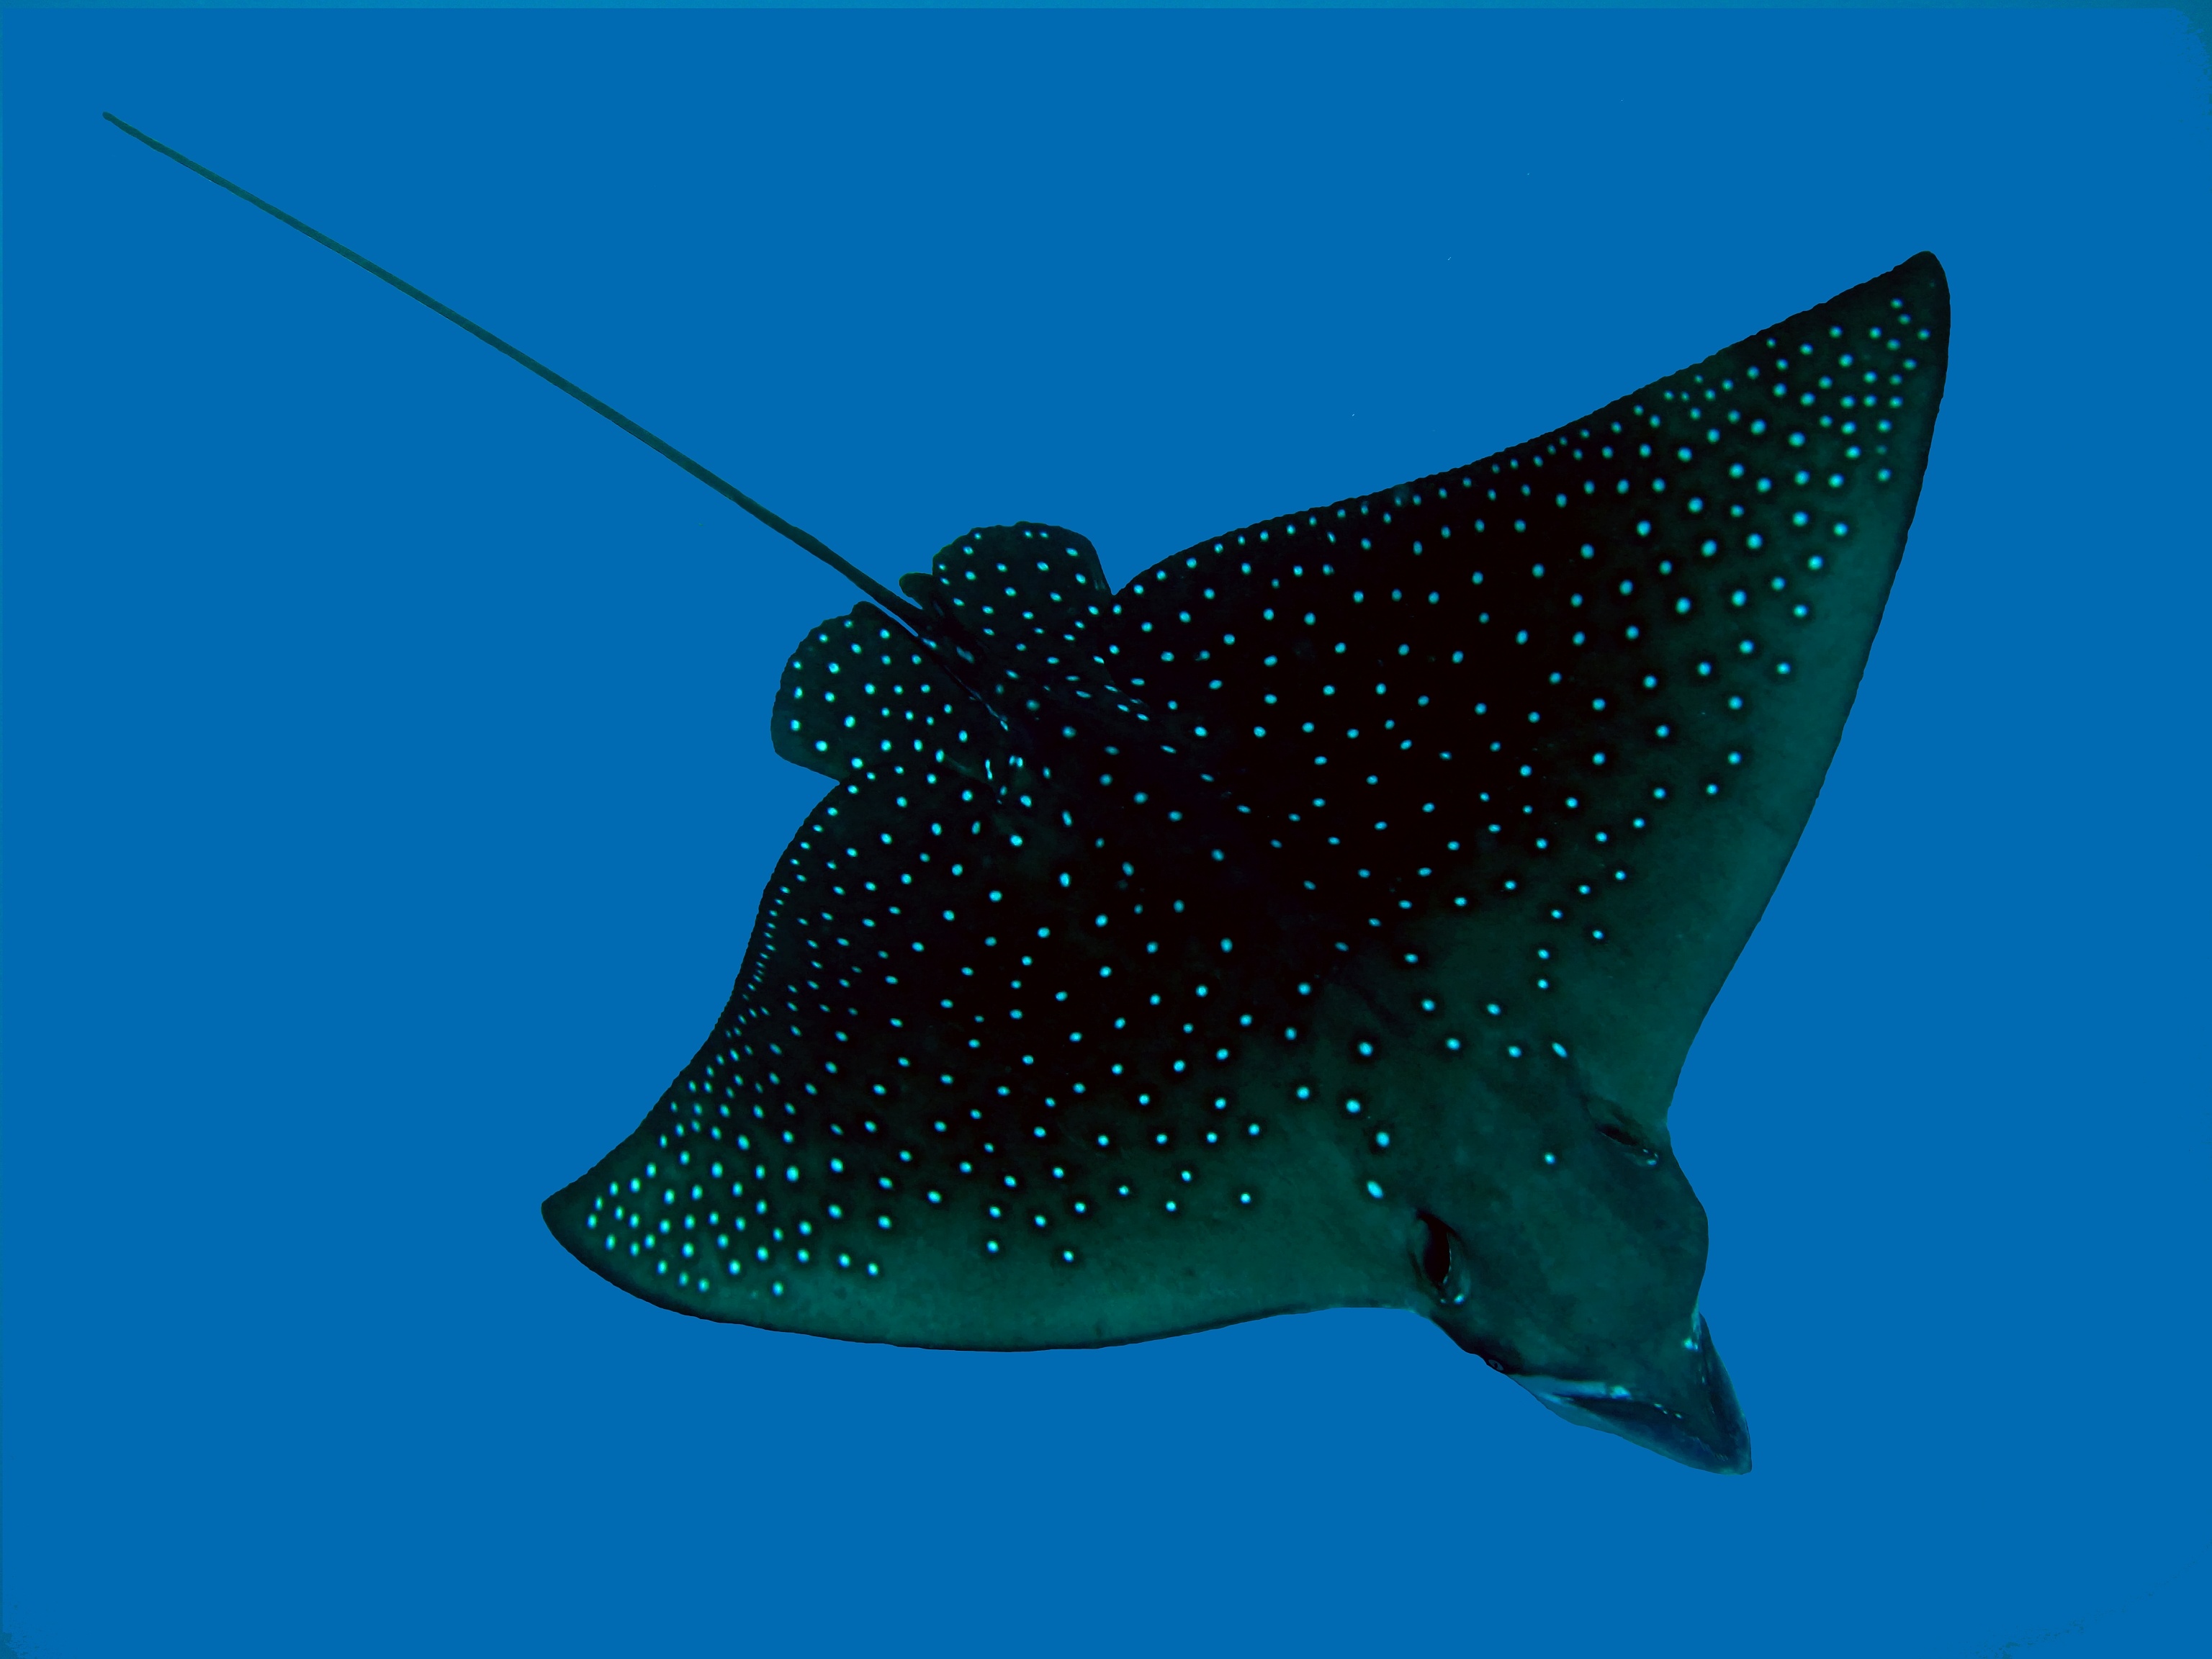 Young eagle ray soaring through the waters of the mi&#039;l channel dive site in Yap, Micronesia